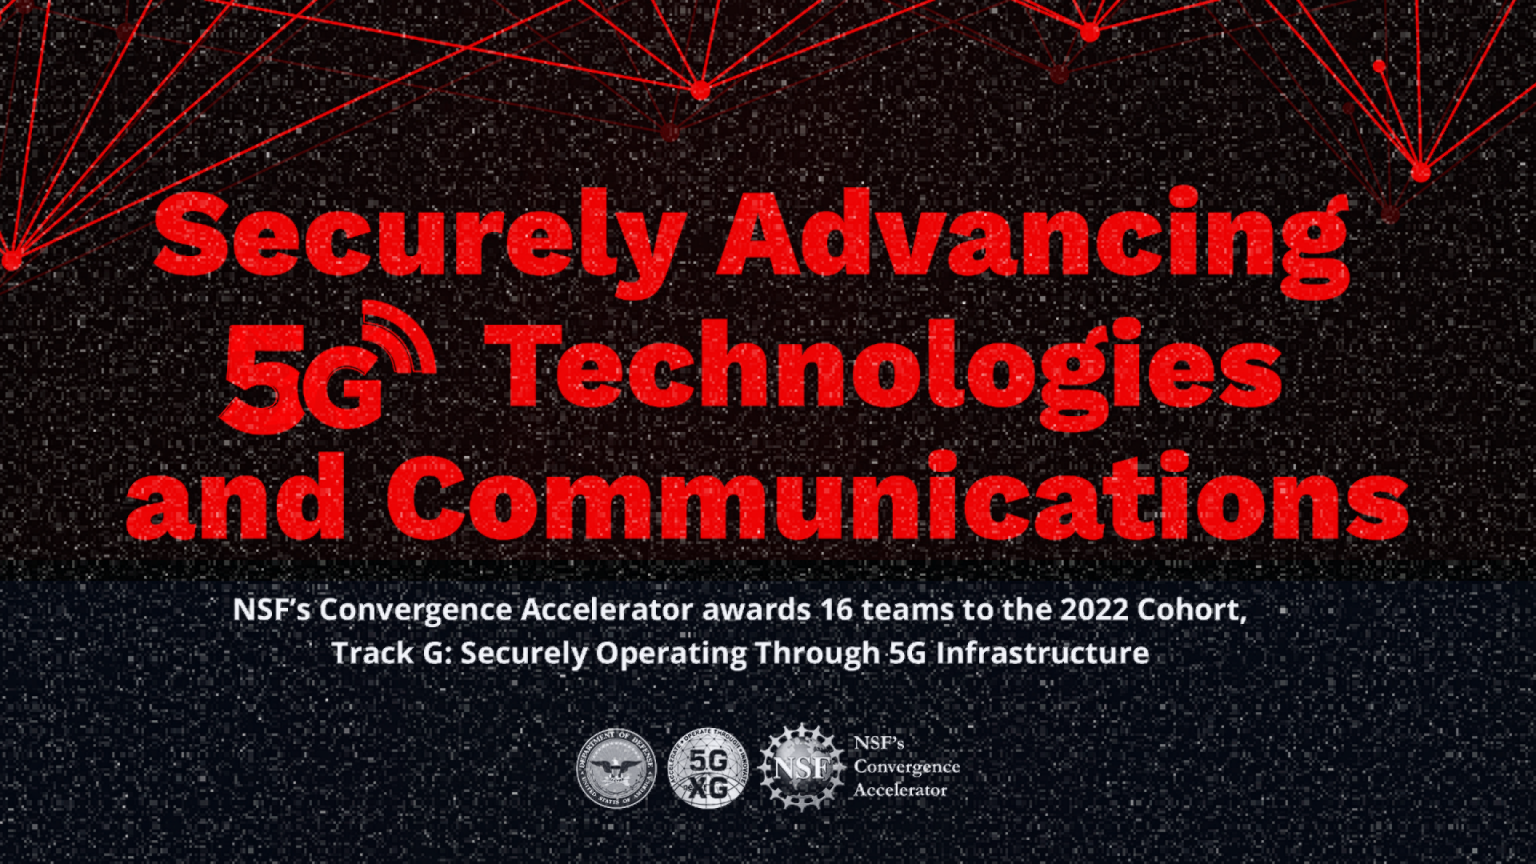 Red Balloon Security Wins 2022 NSF Convergence Accelerator Award for Proposed Improvements to 5G Cybersecurity Through Hardening of Embedded Devices